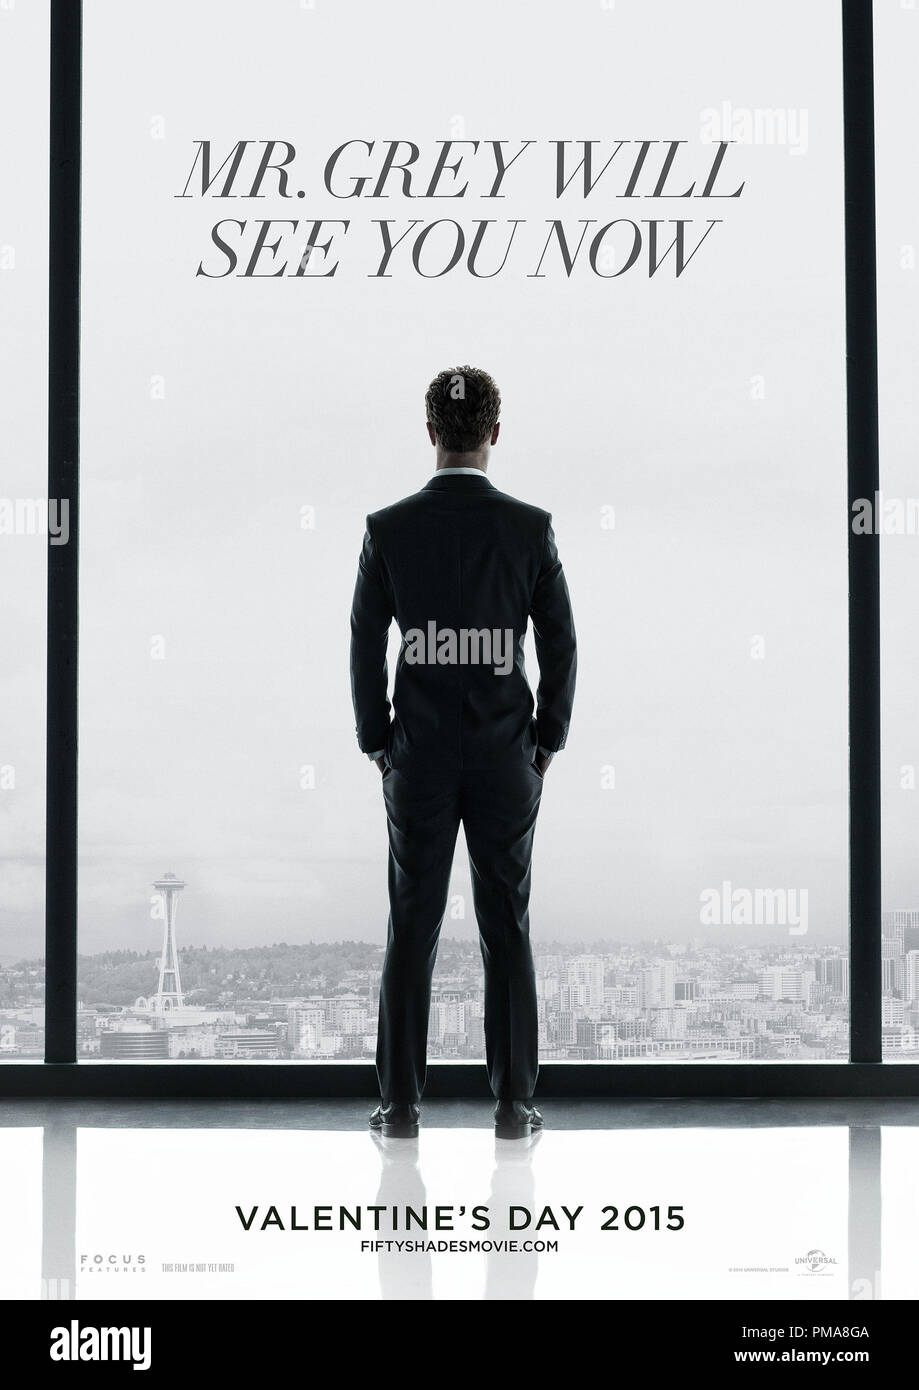 Fifty shades of images hi-res - and grey photography stock poster Alamy film